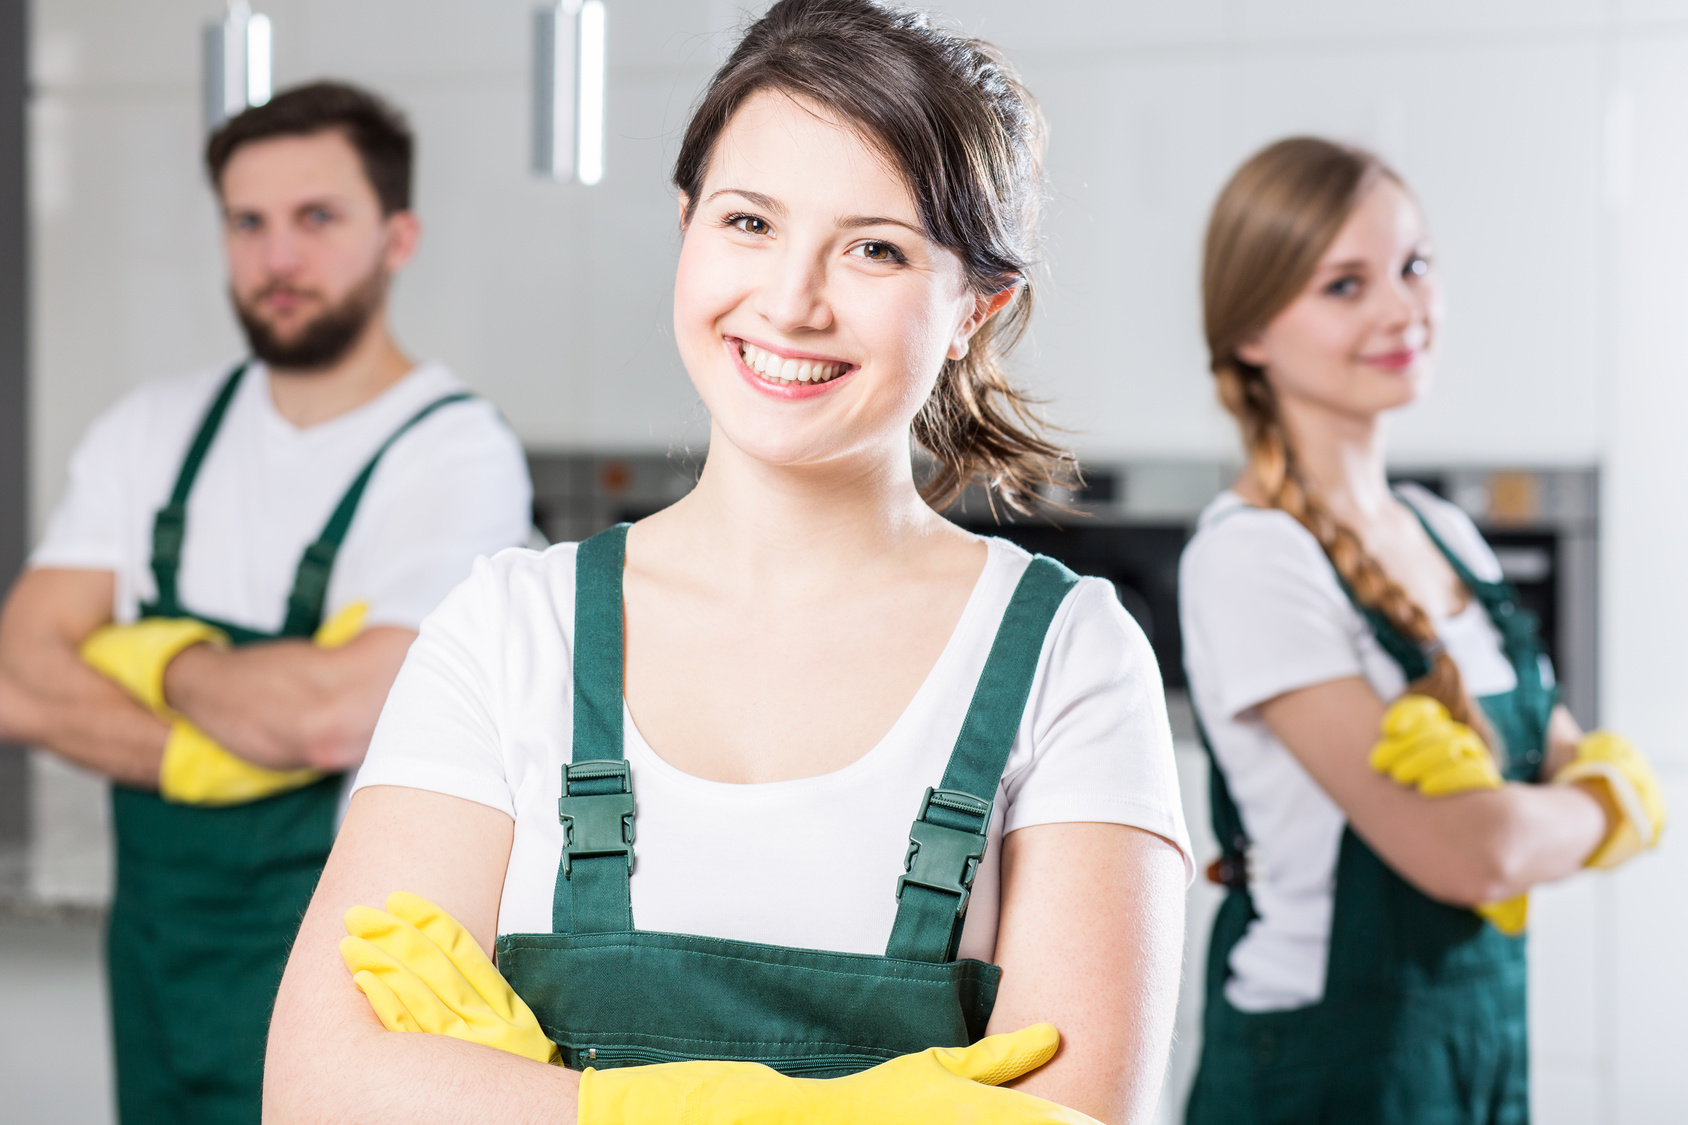 How To Find The Best Housekeeping Services In Your Area